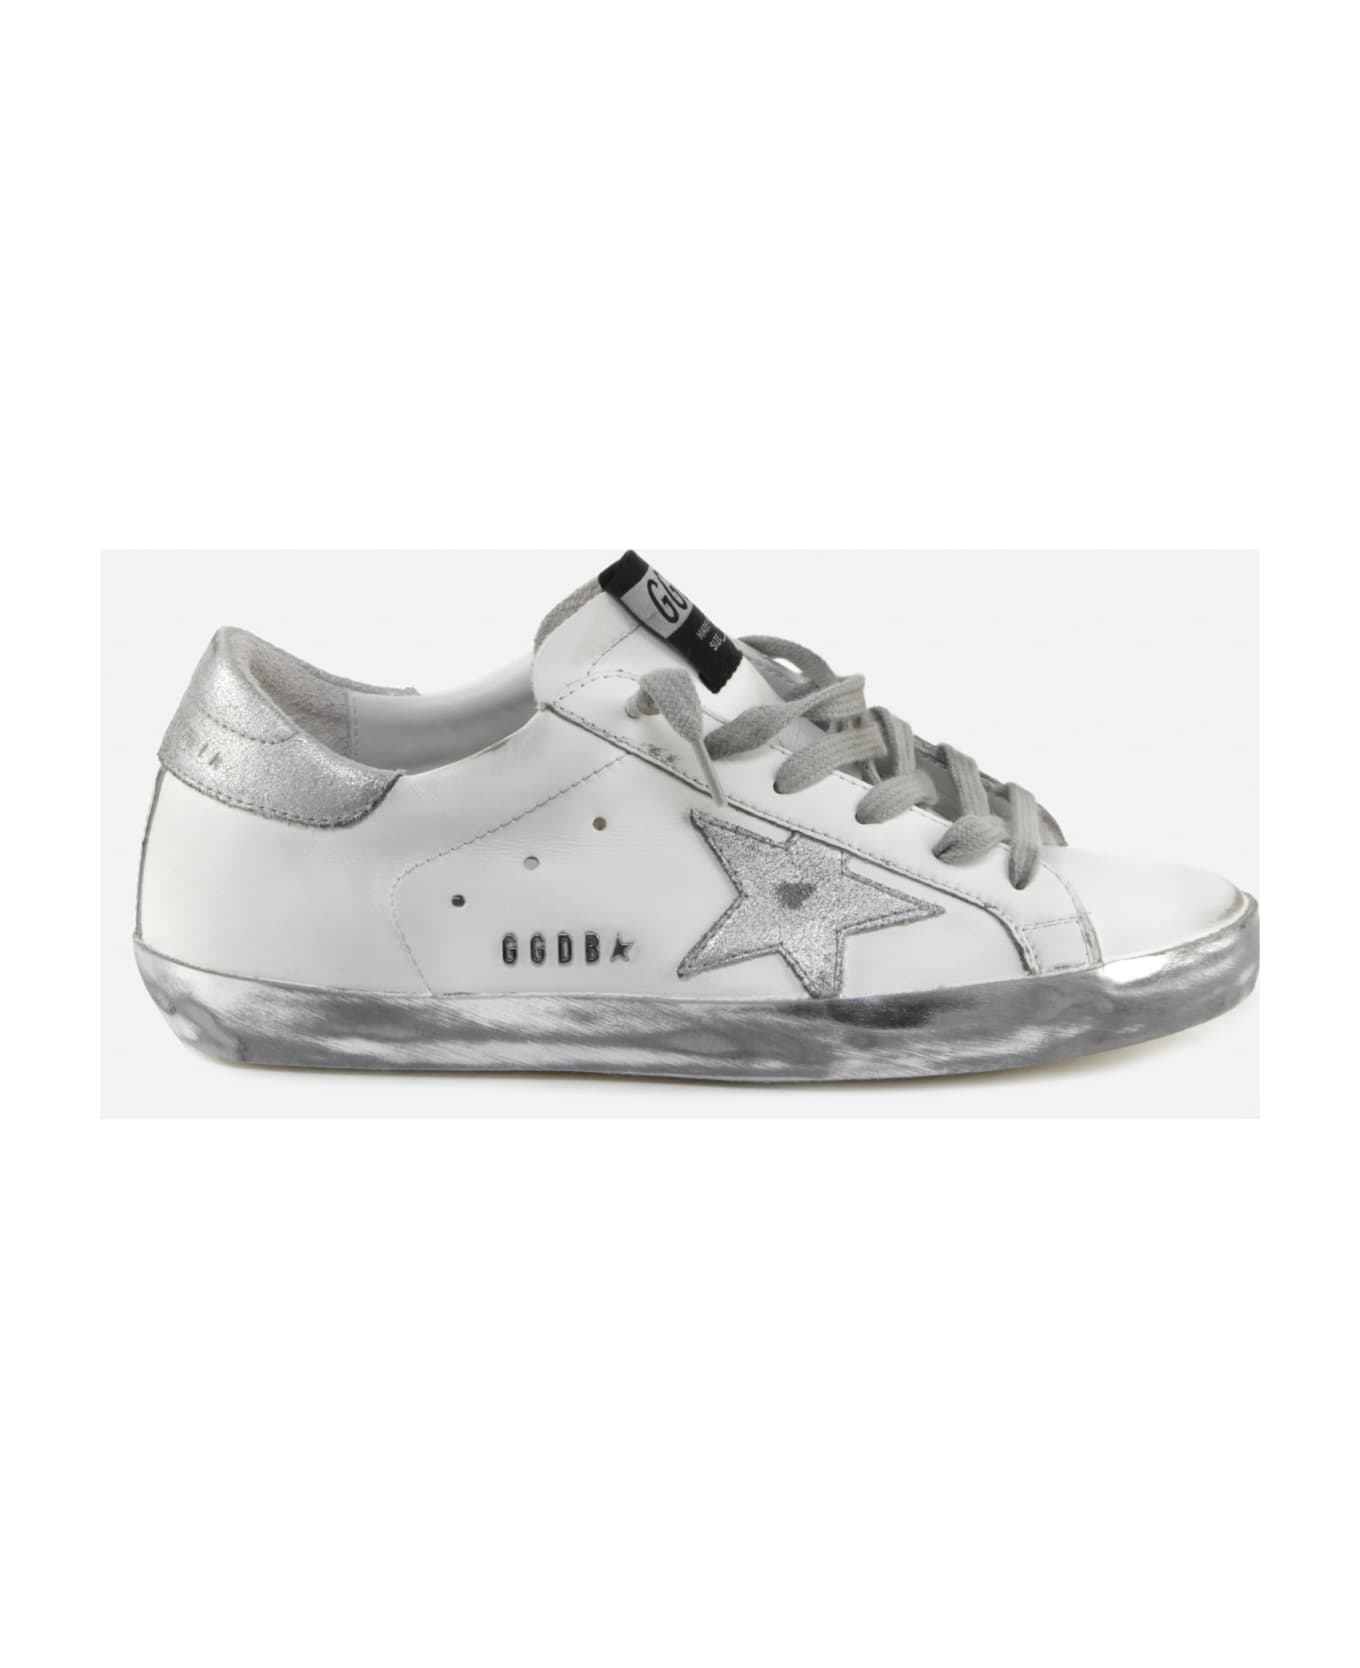 Golden Goose Superstar Sneakers With Laminated Leather Details - White